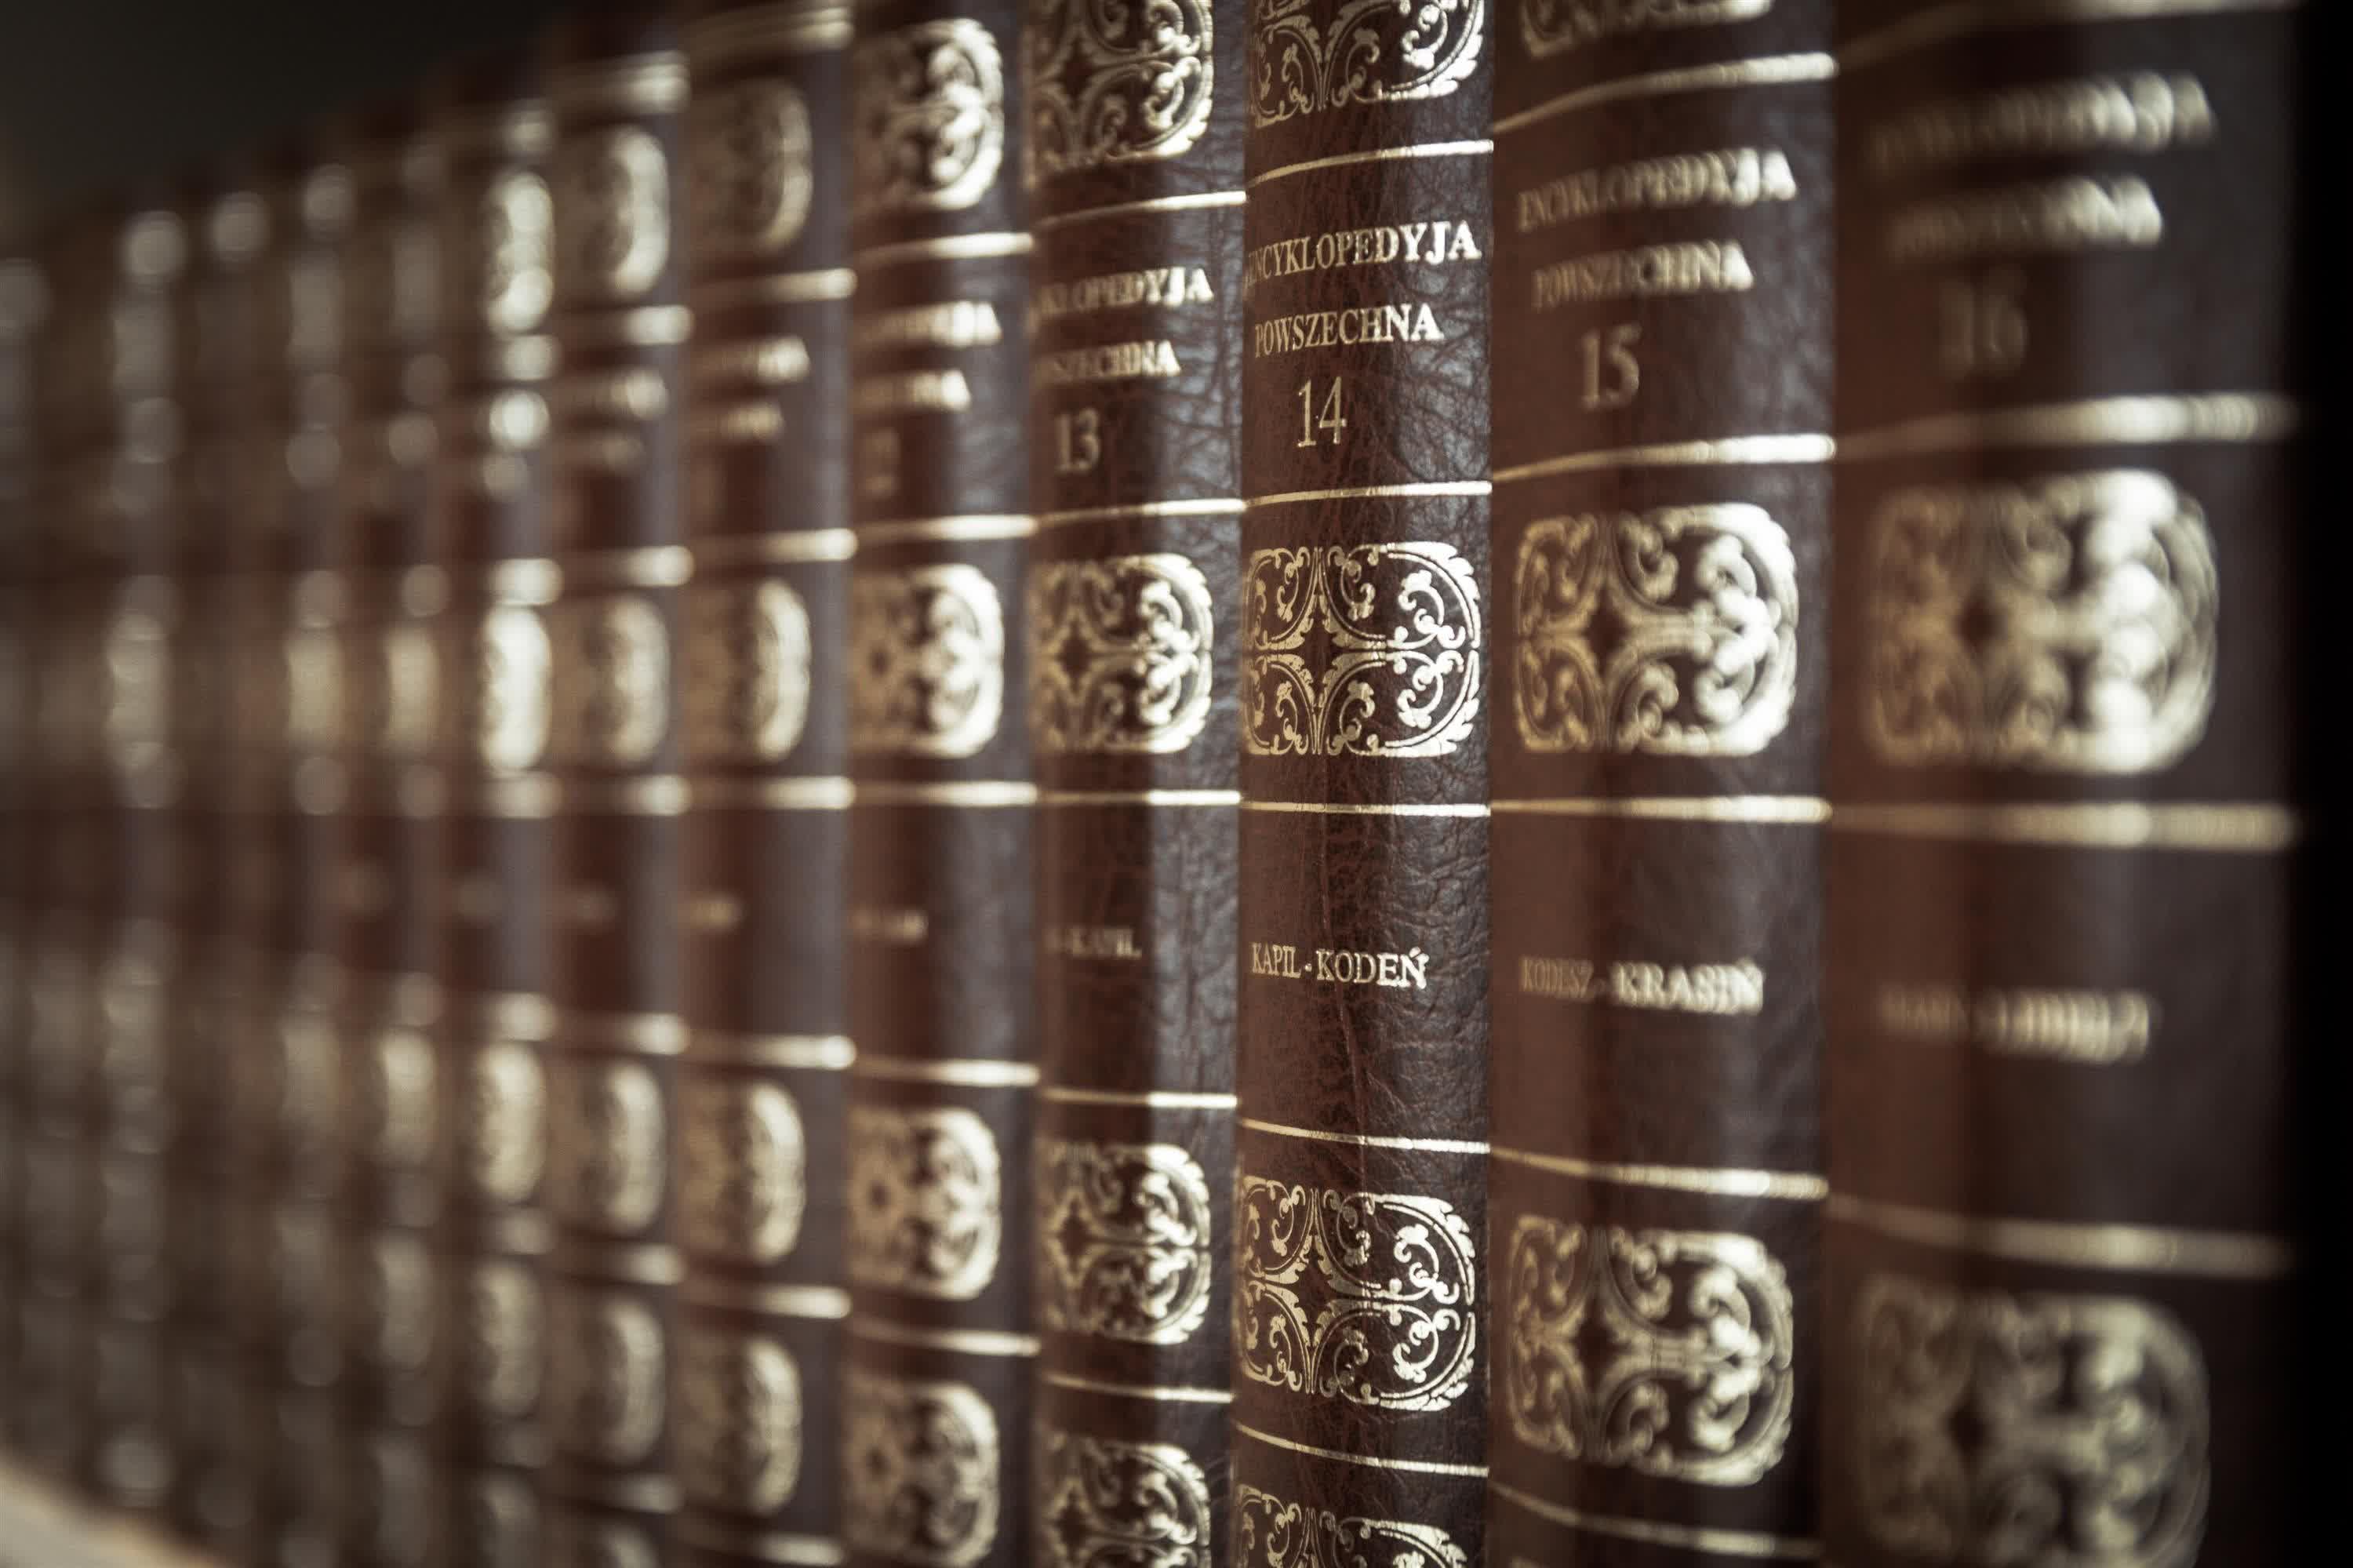 AI is polluting the Internet, so one writer bought a physical encyclopedia set instead